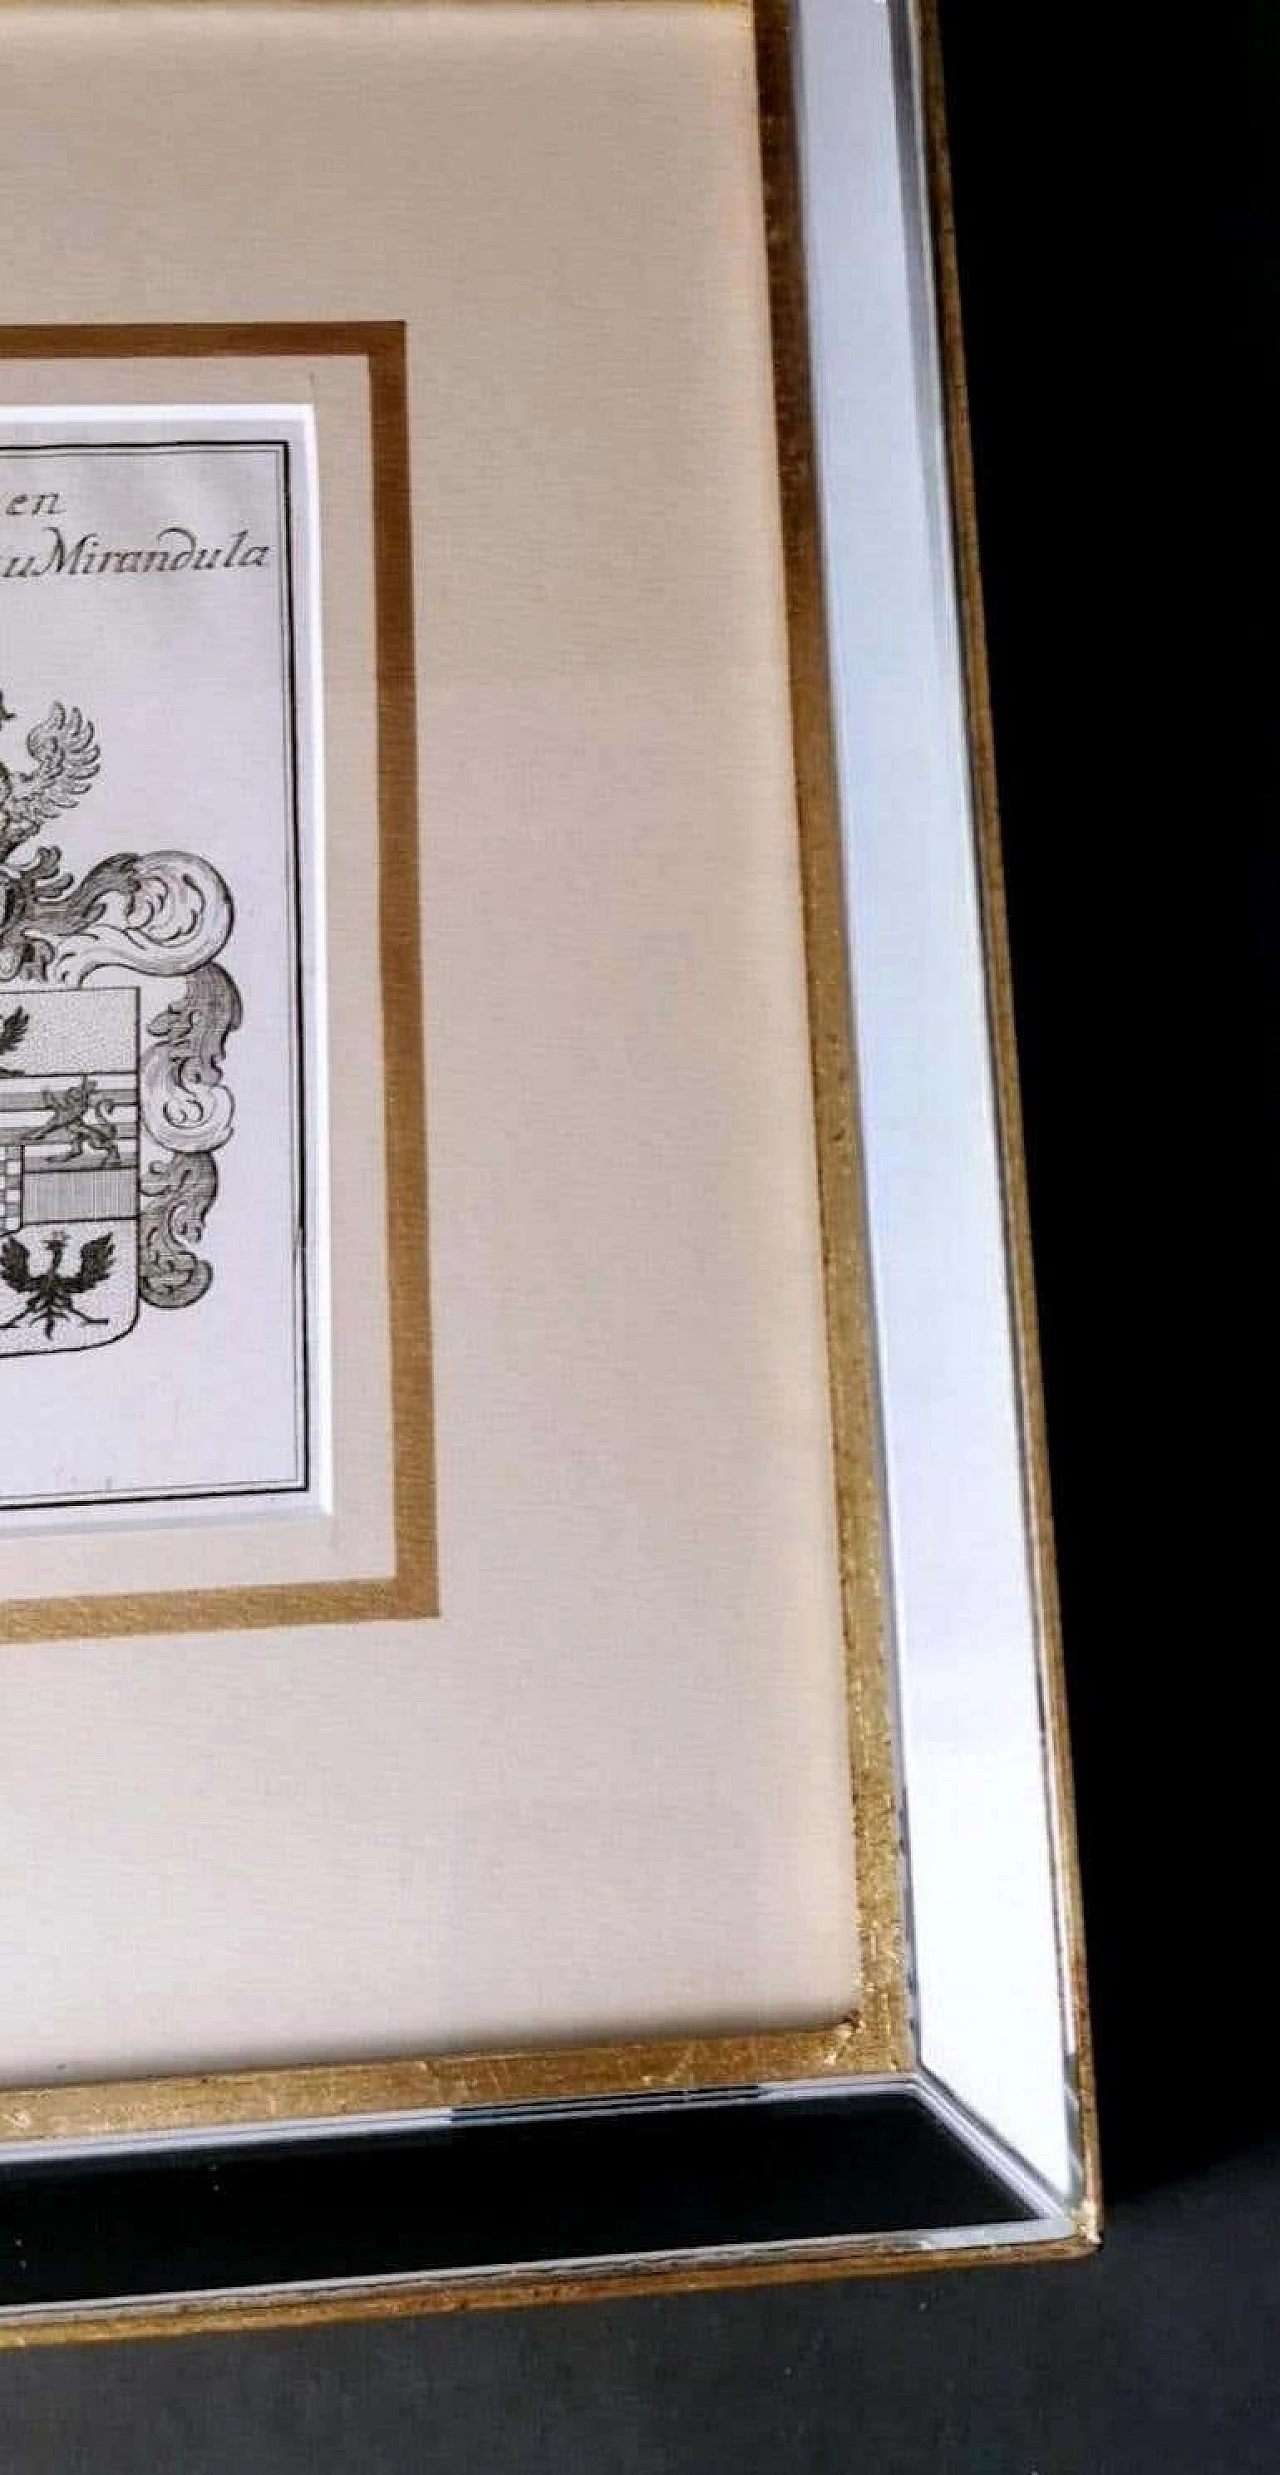 Engraved Dutch print depicting the coat of arms of the Dukes of Mirandola with mirrored frame, 17th century 8